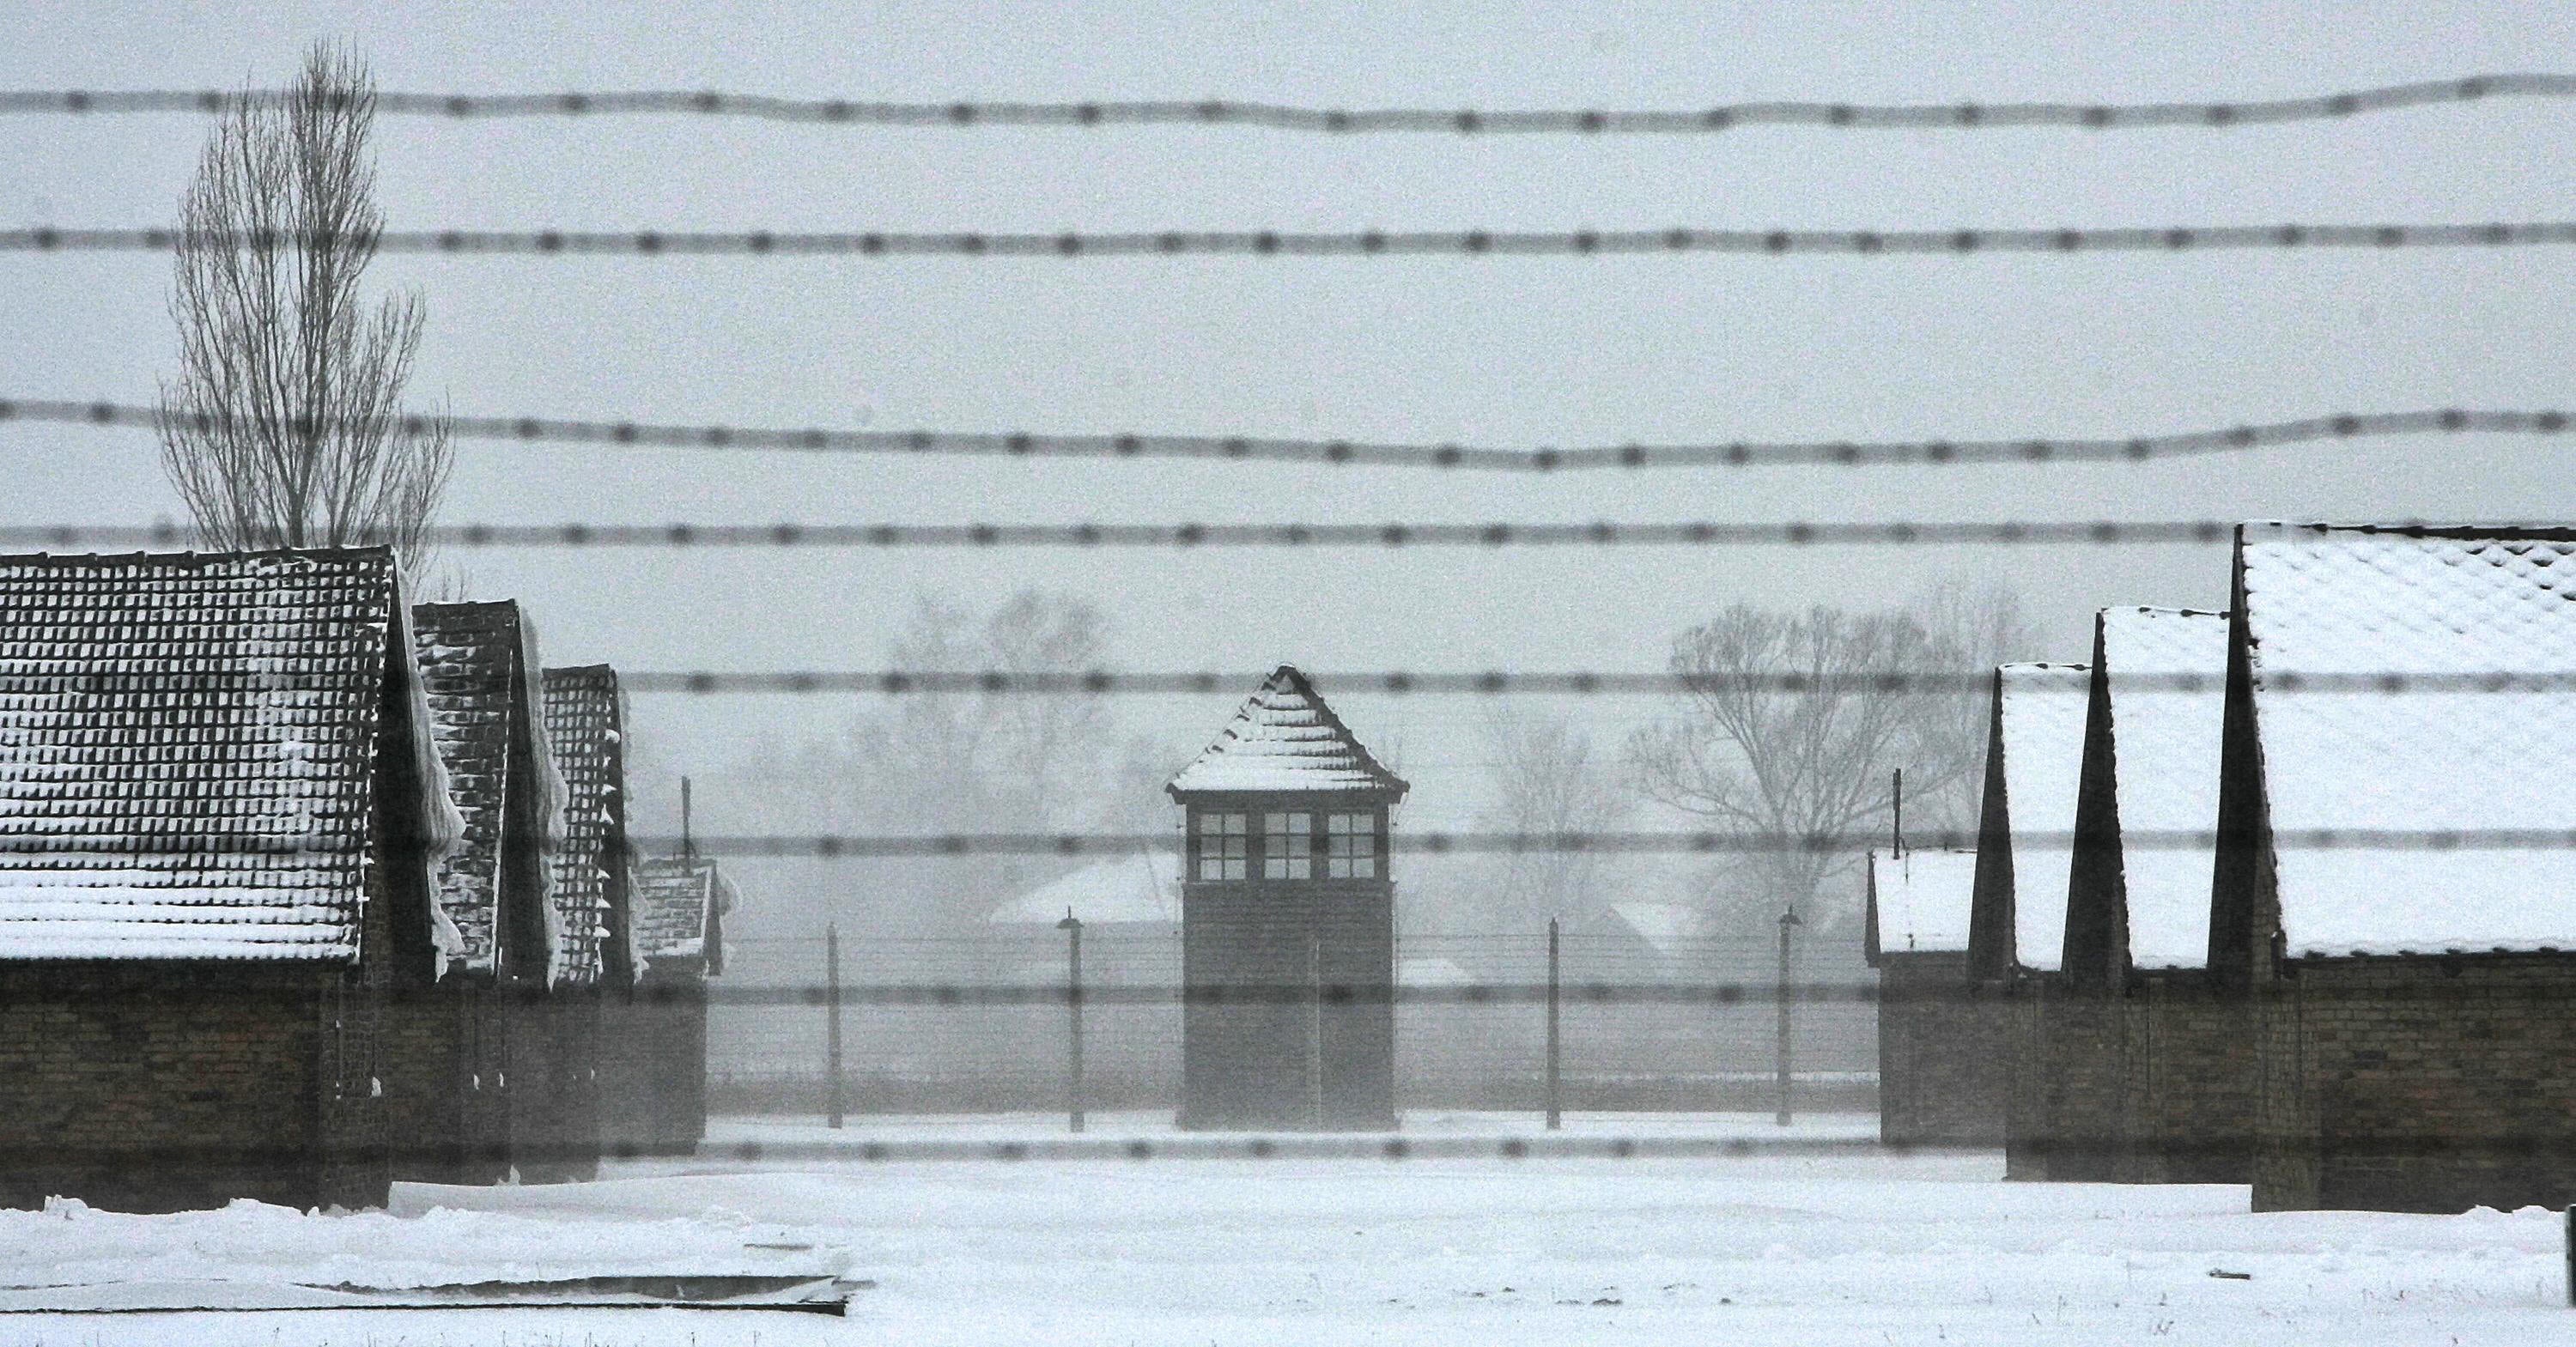 Over one million people were killed at the Nazi death camp Auschwitz